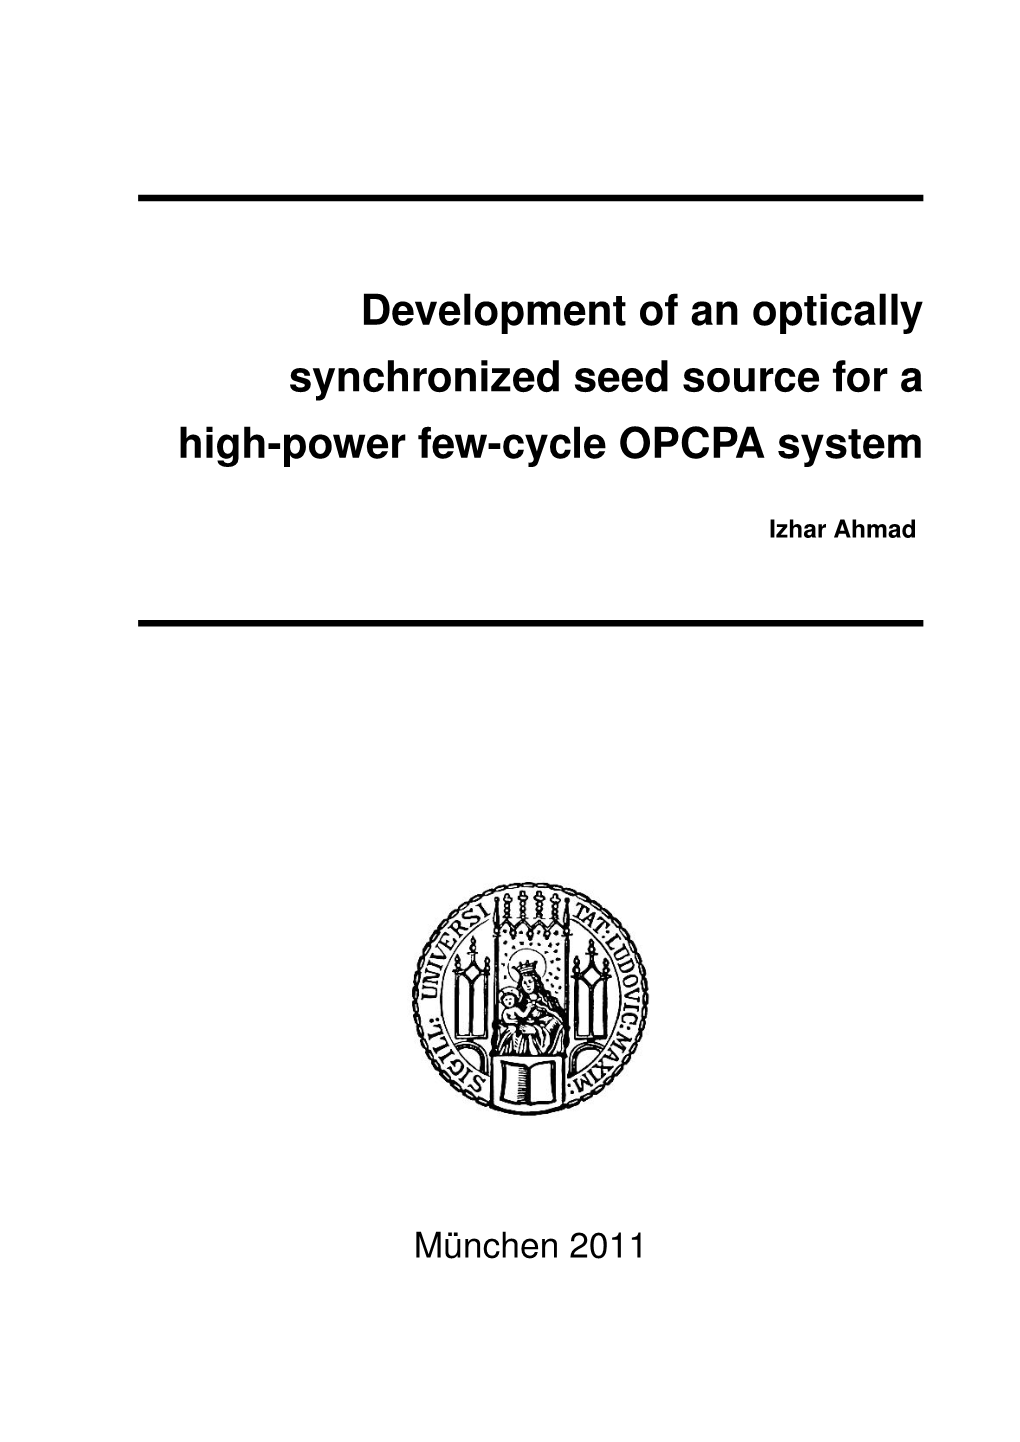 Development of an Optically Synchronized Seed Source for a High-Power Few-Cycle OPCPA System